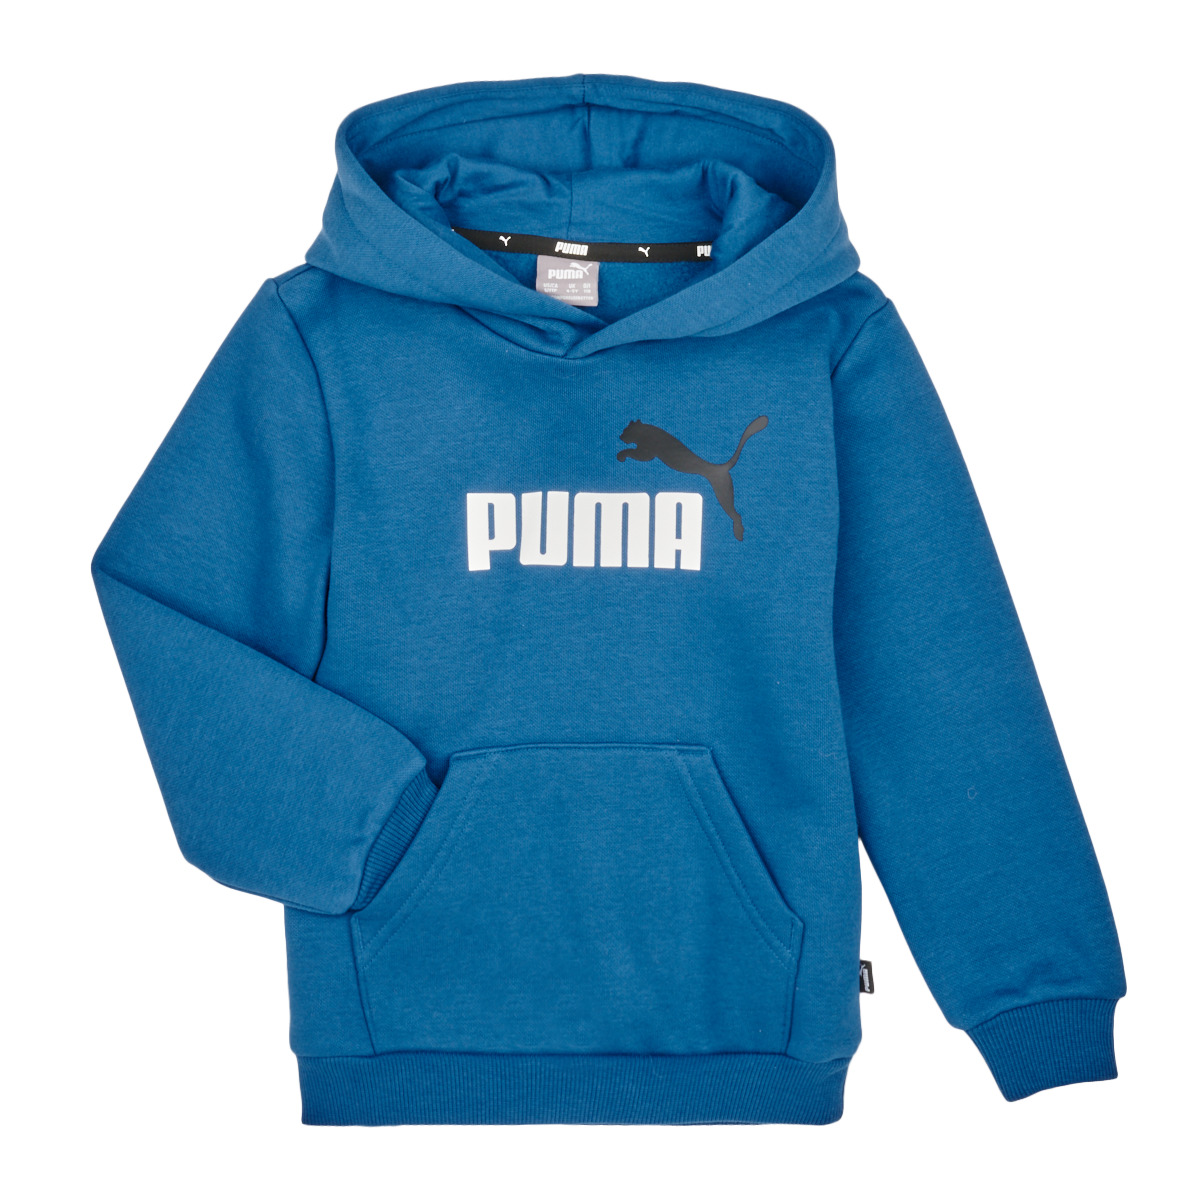 Puma ESS 2 COL BIG Clothing delivery 26,40 LOGO Child Europe € - HOODIE Fast | ! sweaters Blue Spartoo 